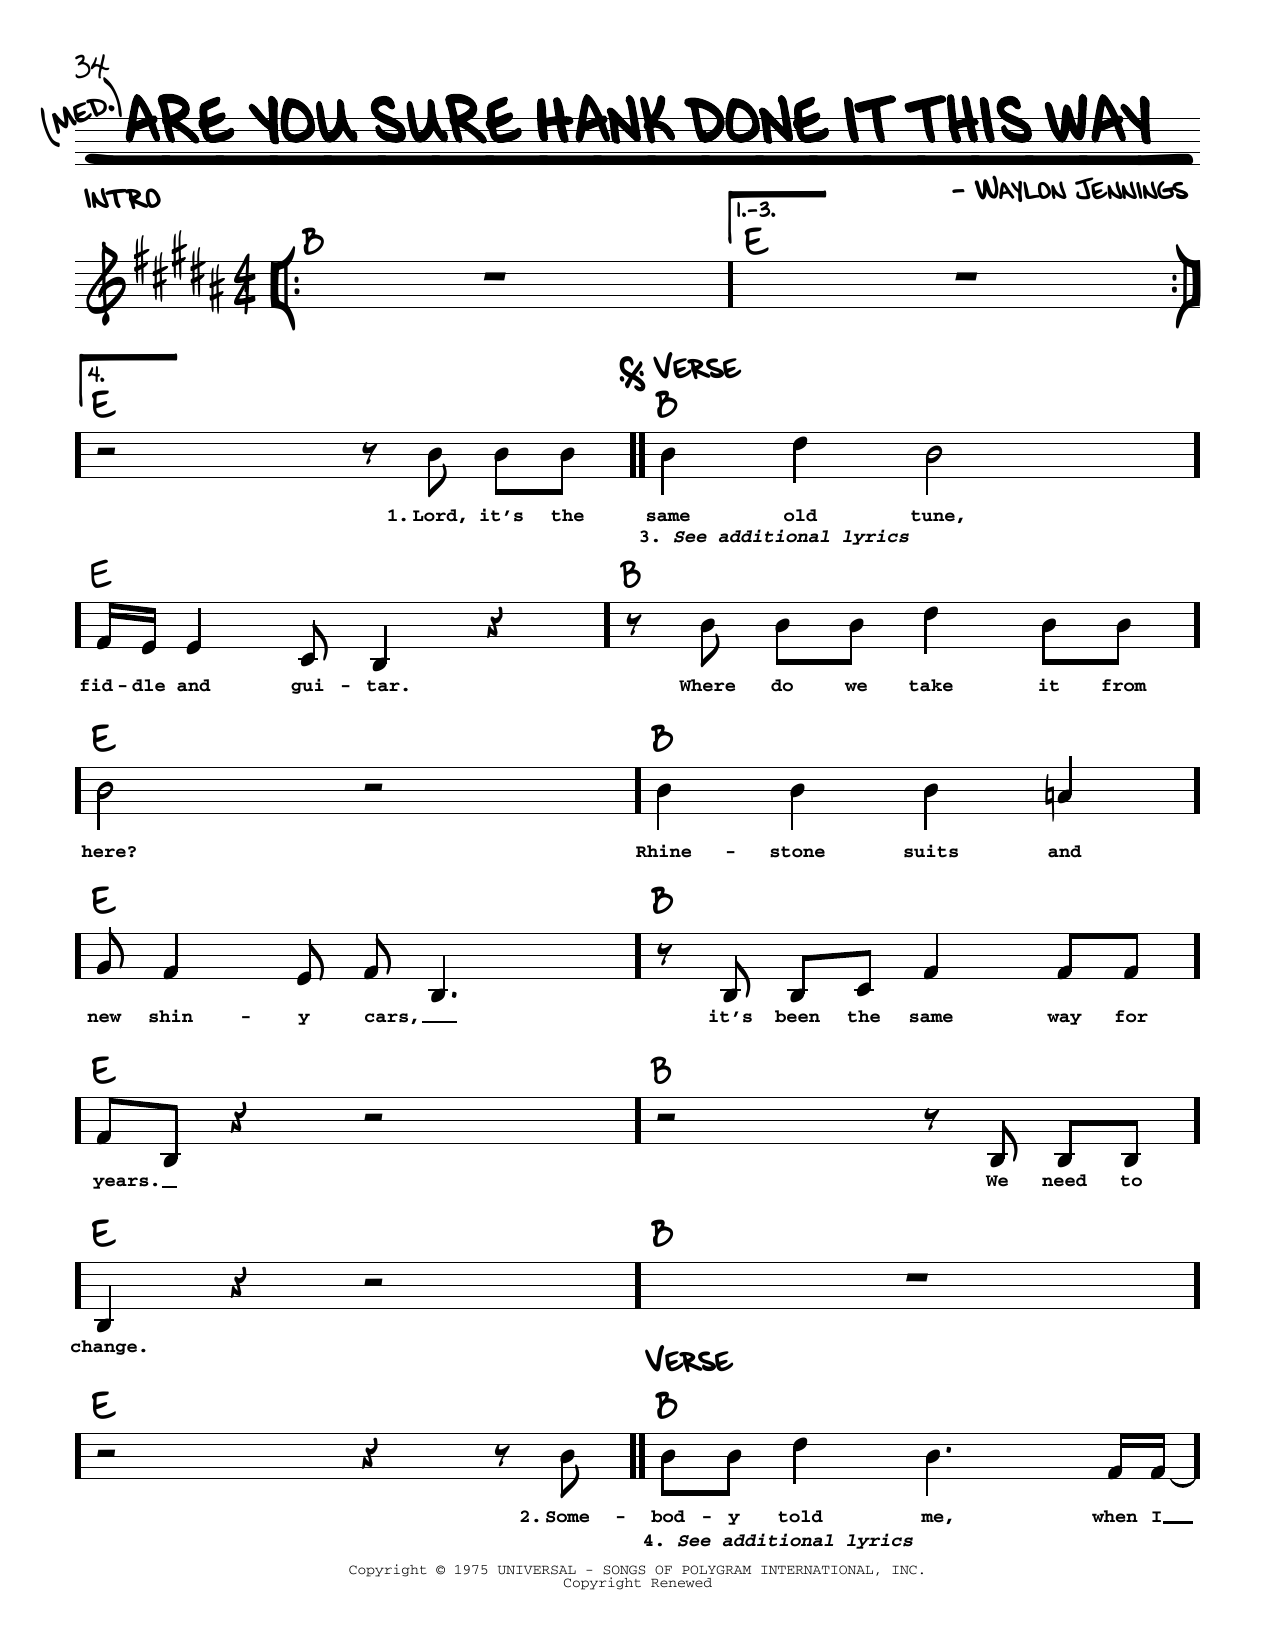 Download Waylon Jennings Are You Sure Hank Done It This Way Sheet Music